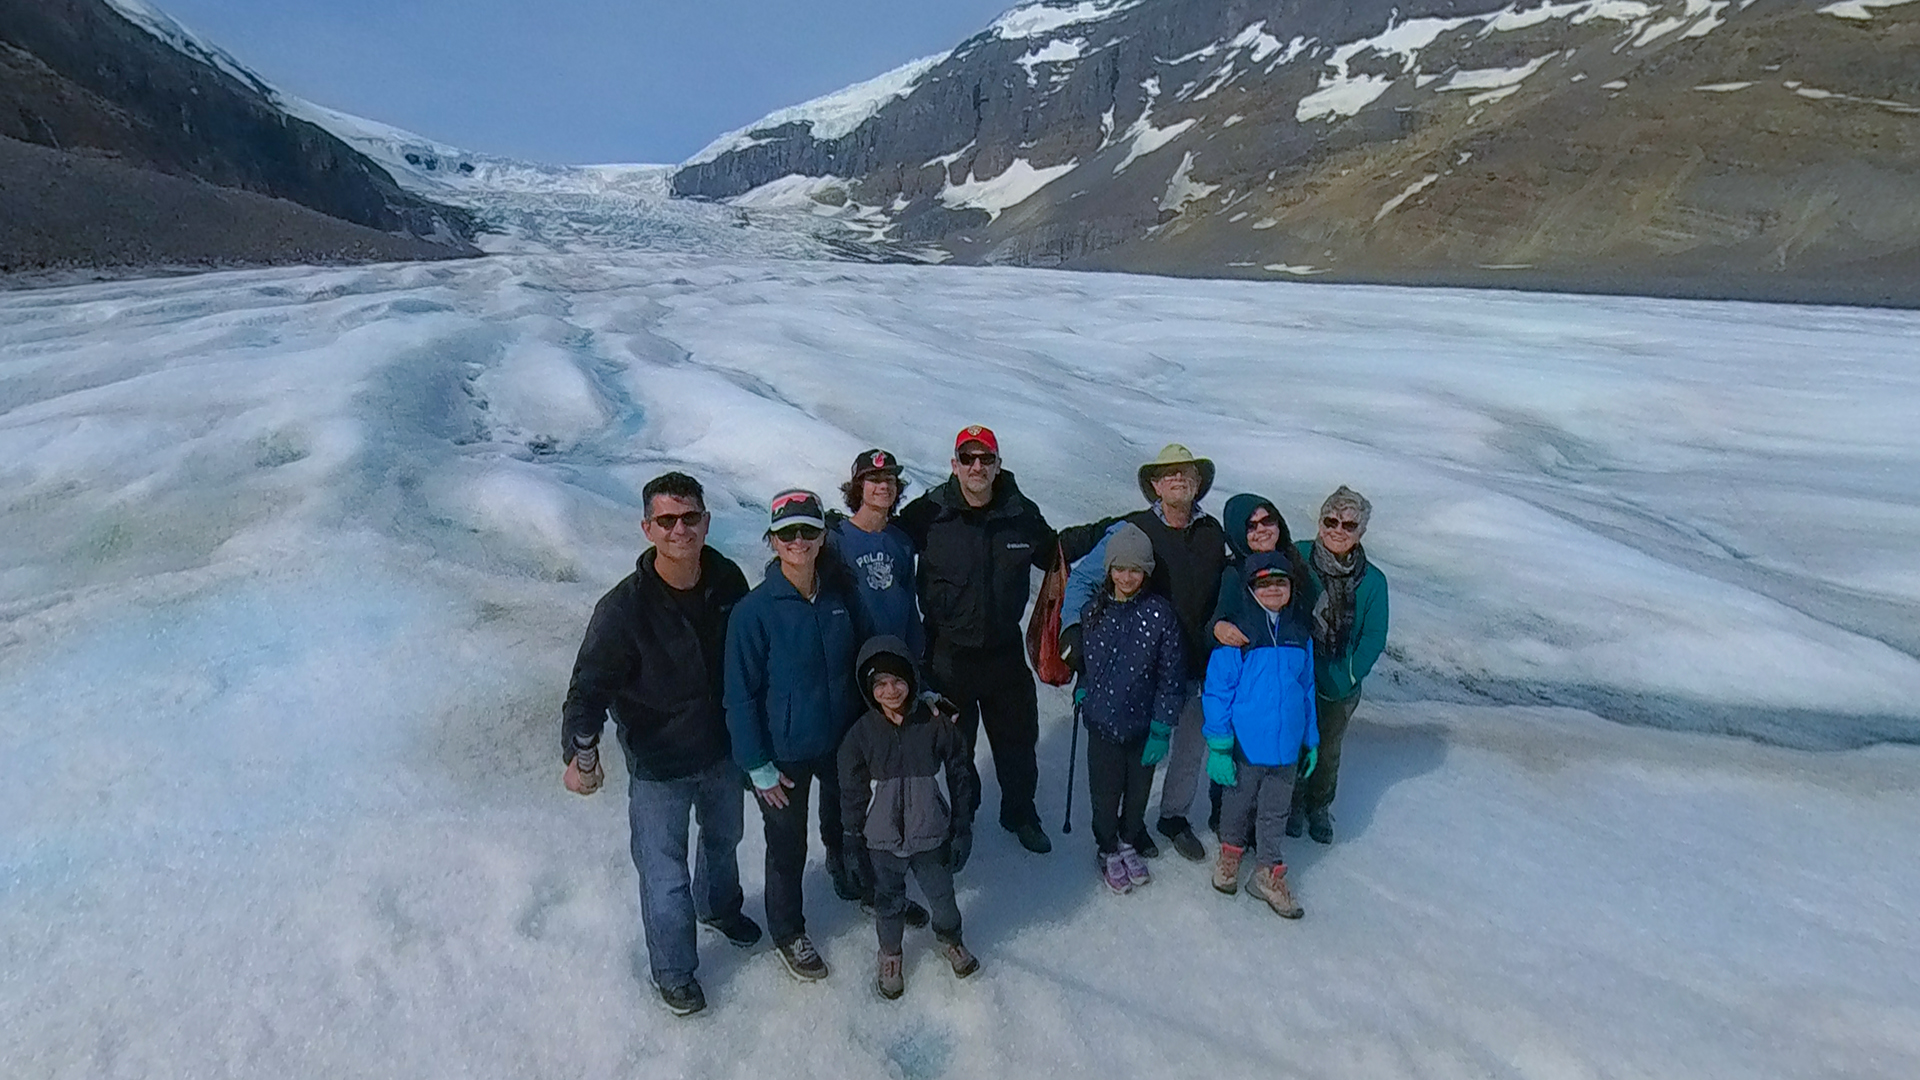 A family takes a group photo on the Athabasca Glacier.